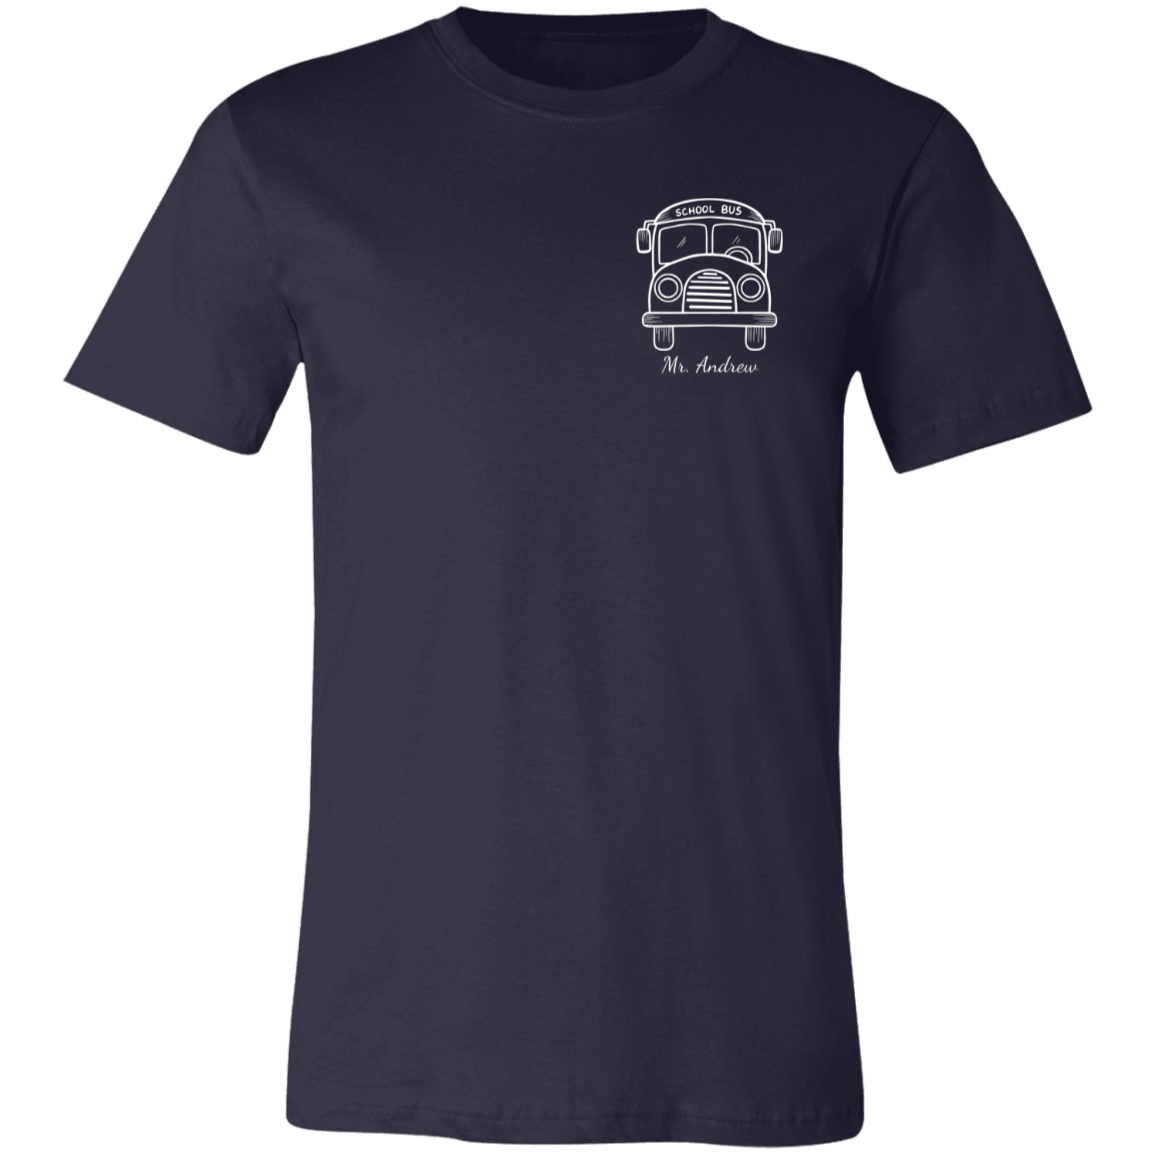 Personalized, Proud Member of the  Bus Driver Club T-Shirt